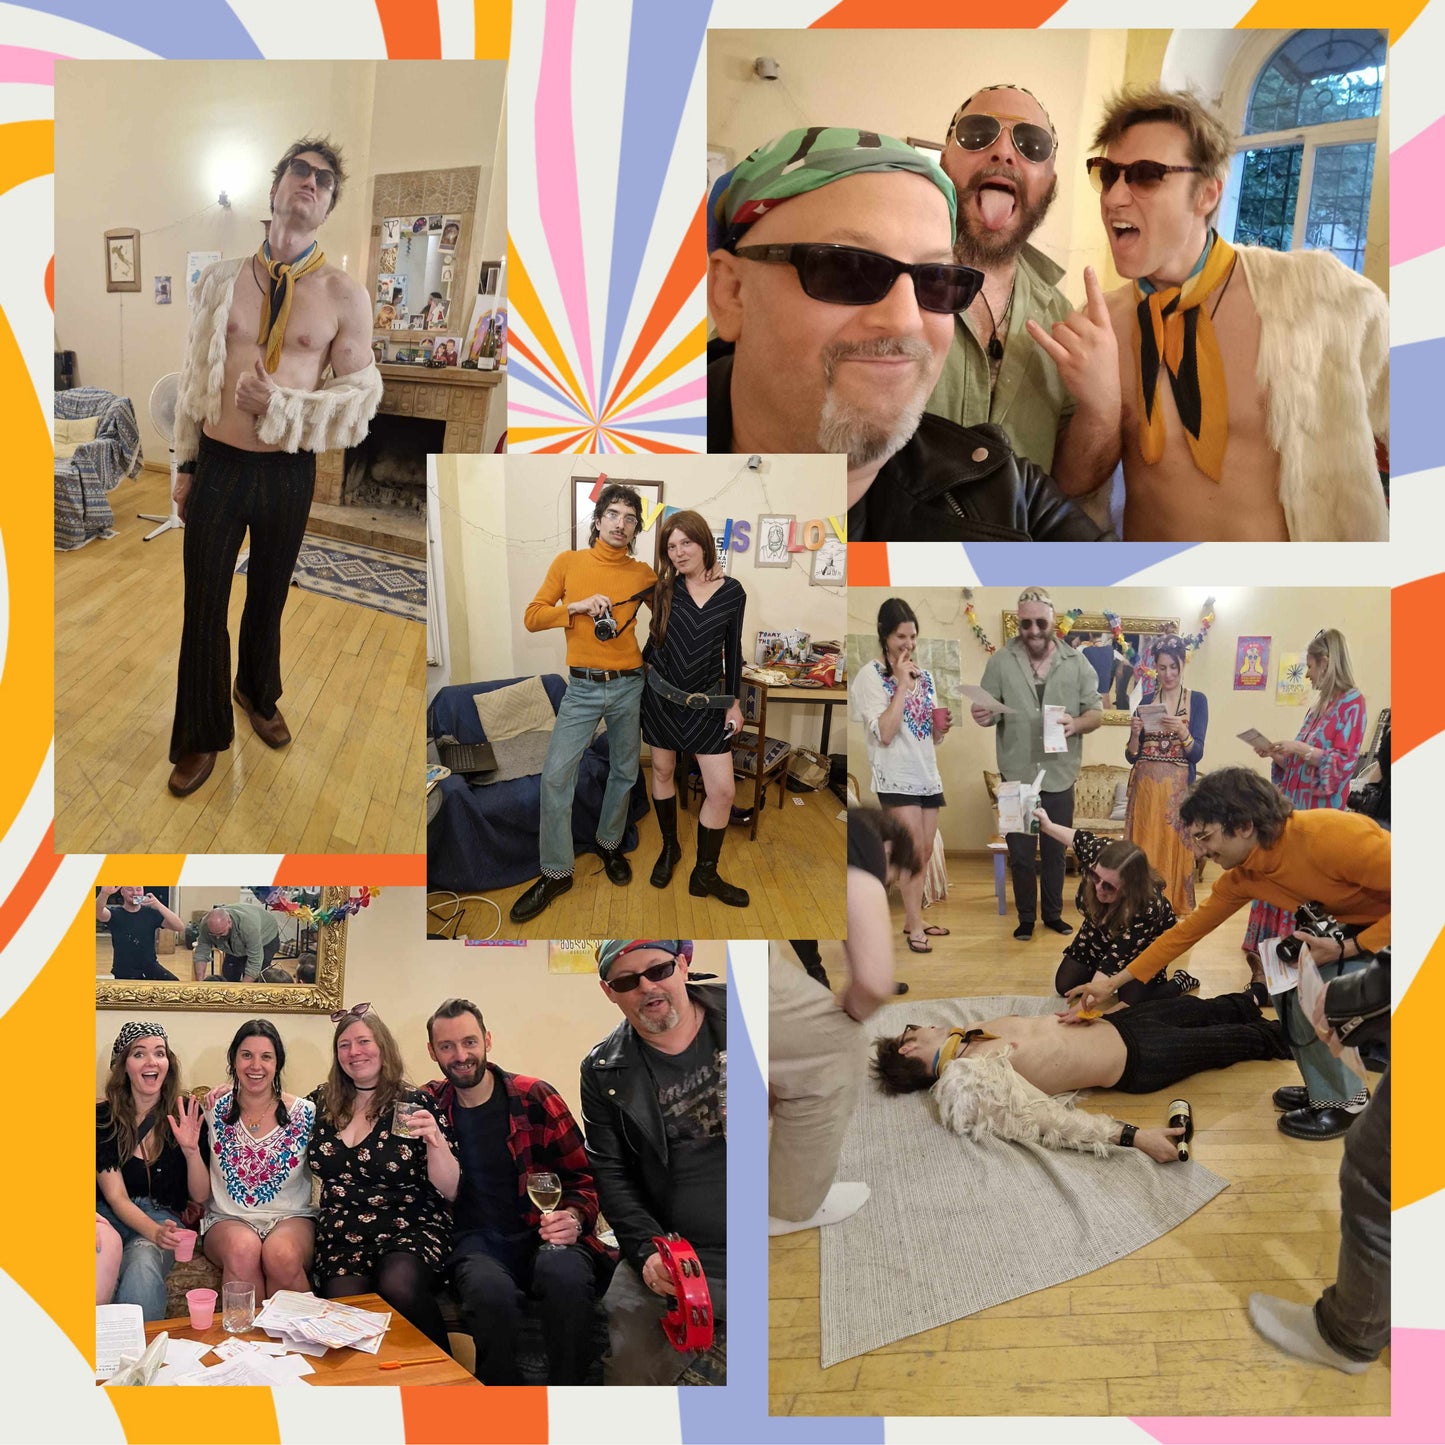 A Killer 60s Festival! A 60s Music Festival themed Murder Mystery Game for 10-20 Players